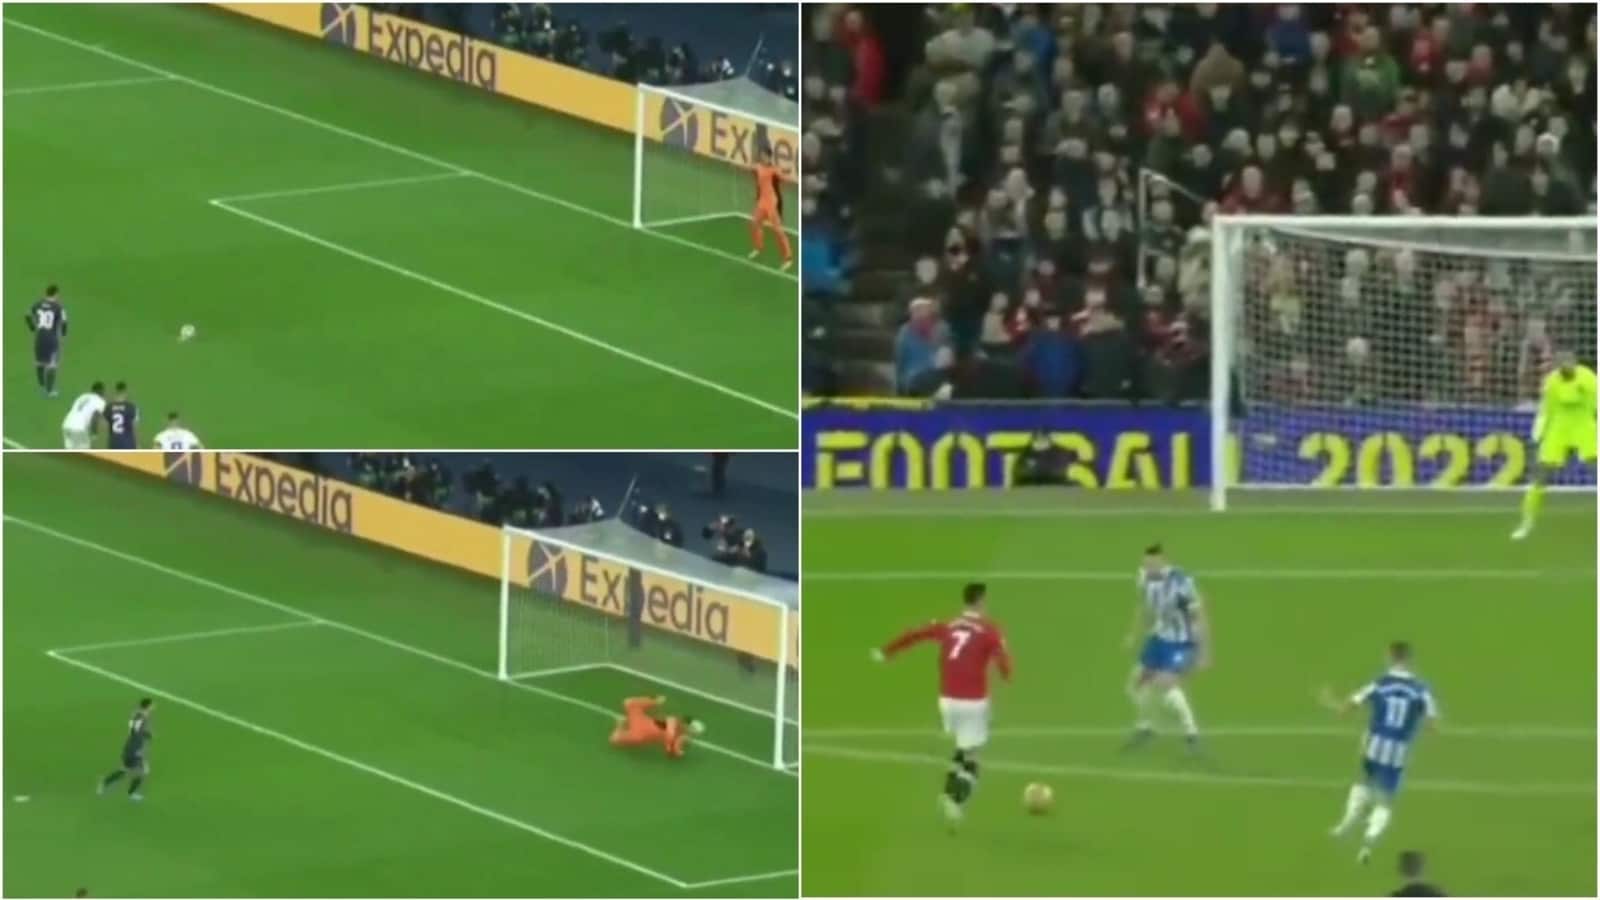 Watch: Ronaldo scores screamer for United merely a minute after Messi’s penalty miss against Real Madrid; Twitter erupts